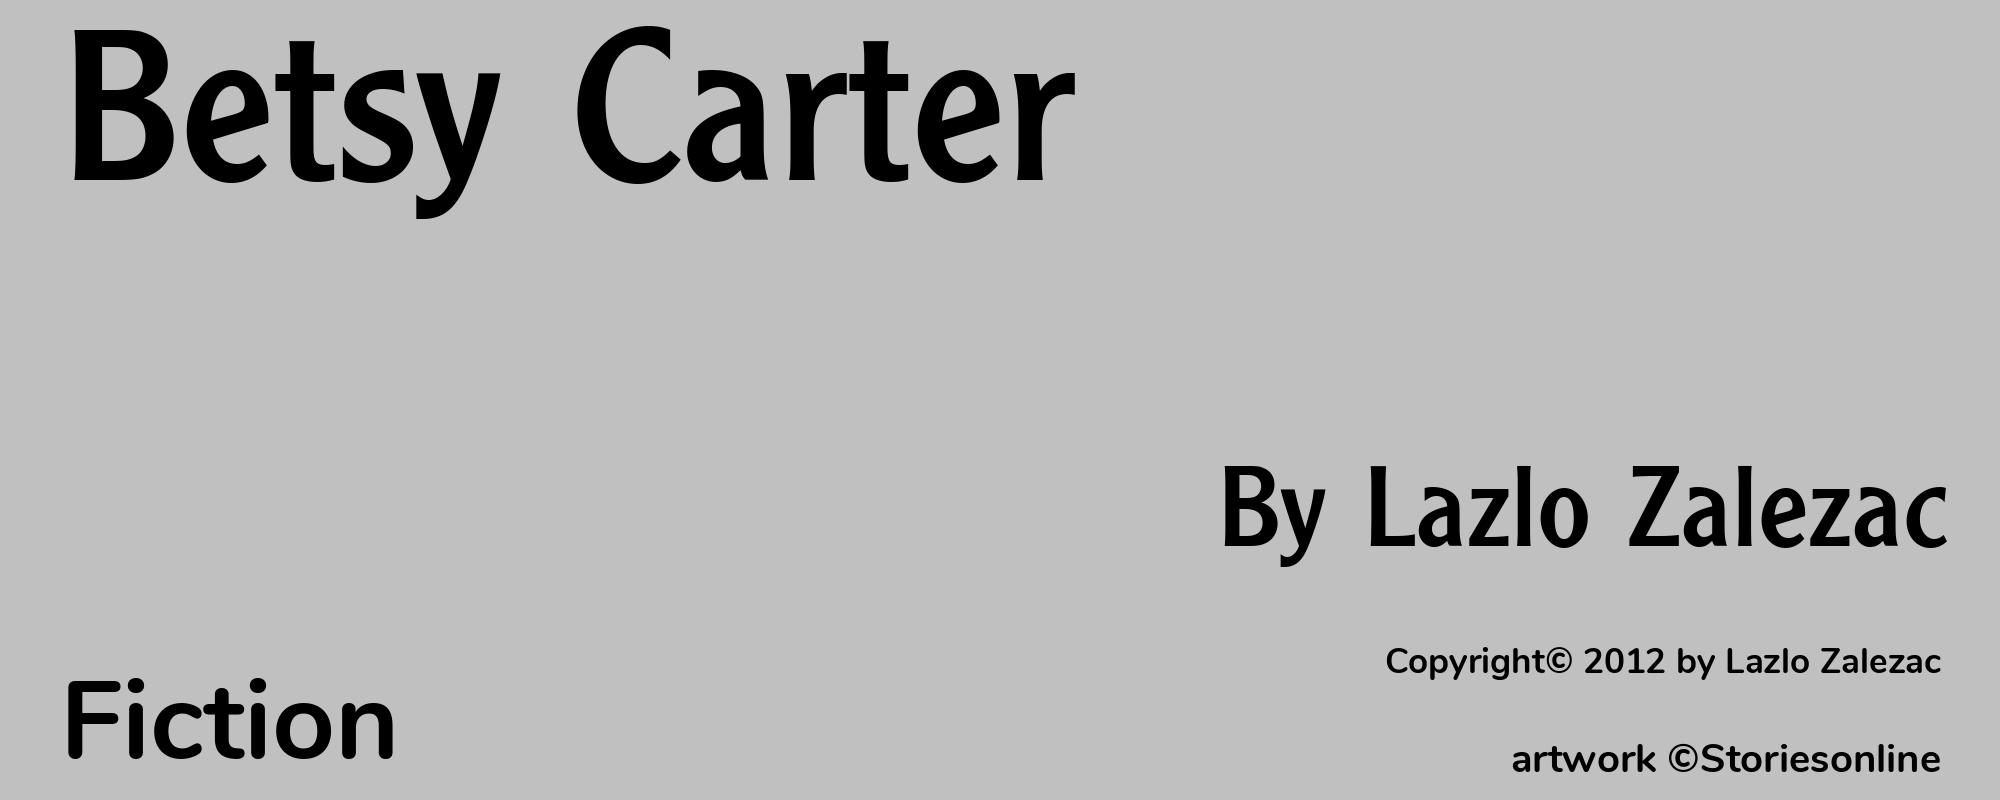 Betsy Carter - Cover